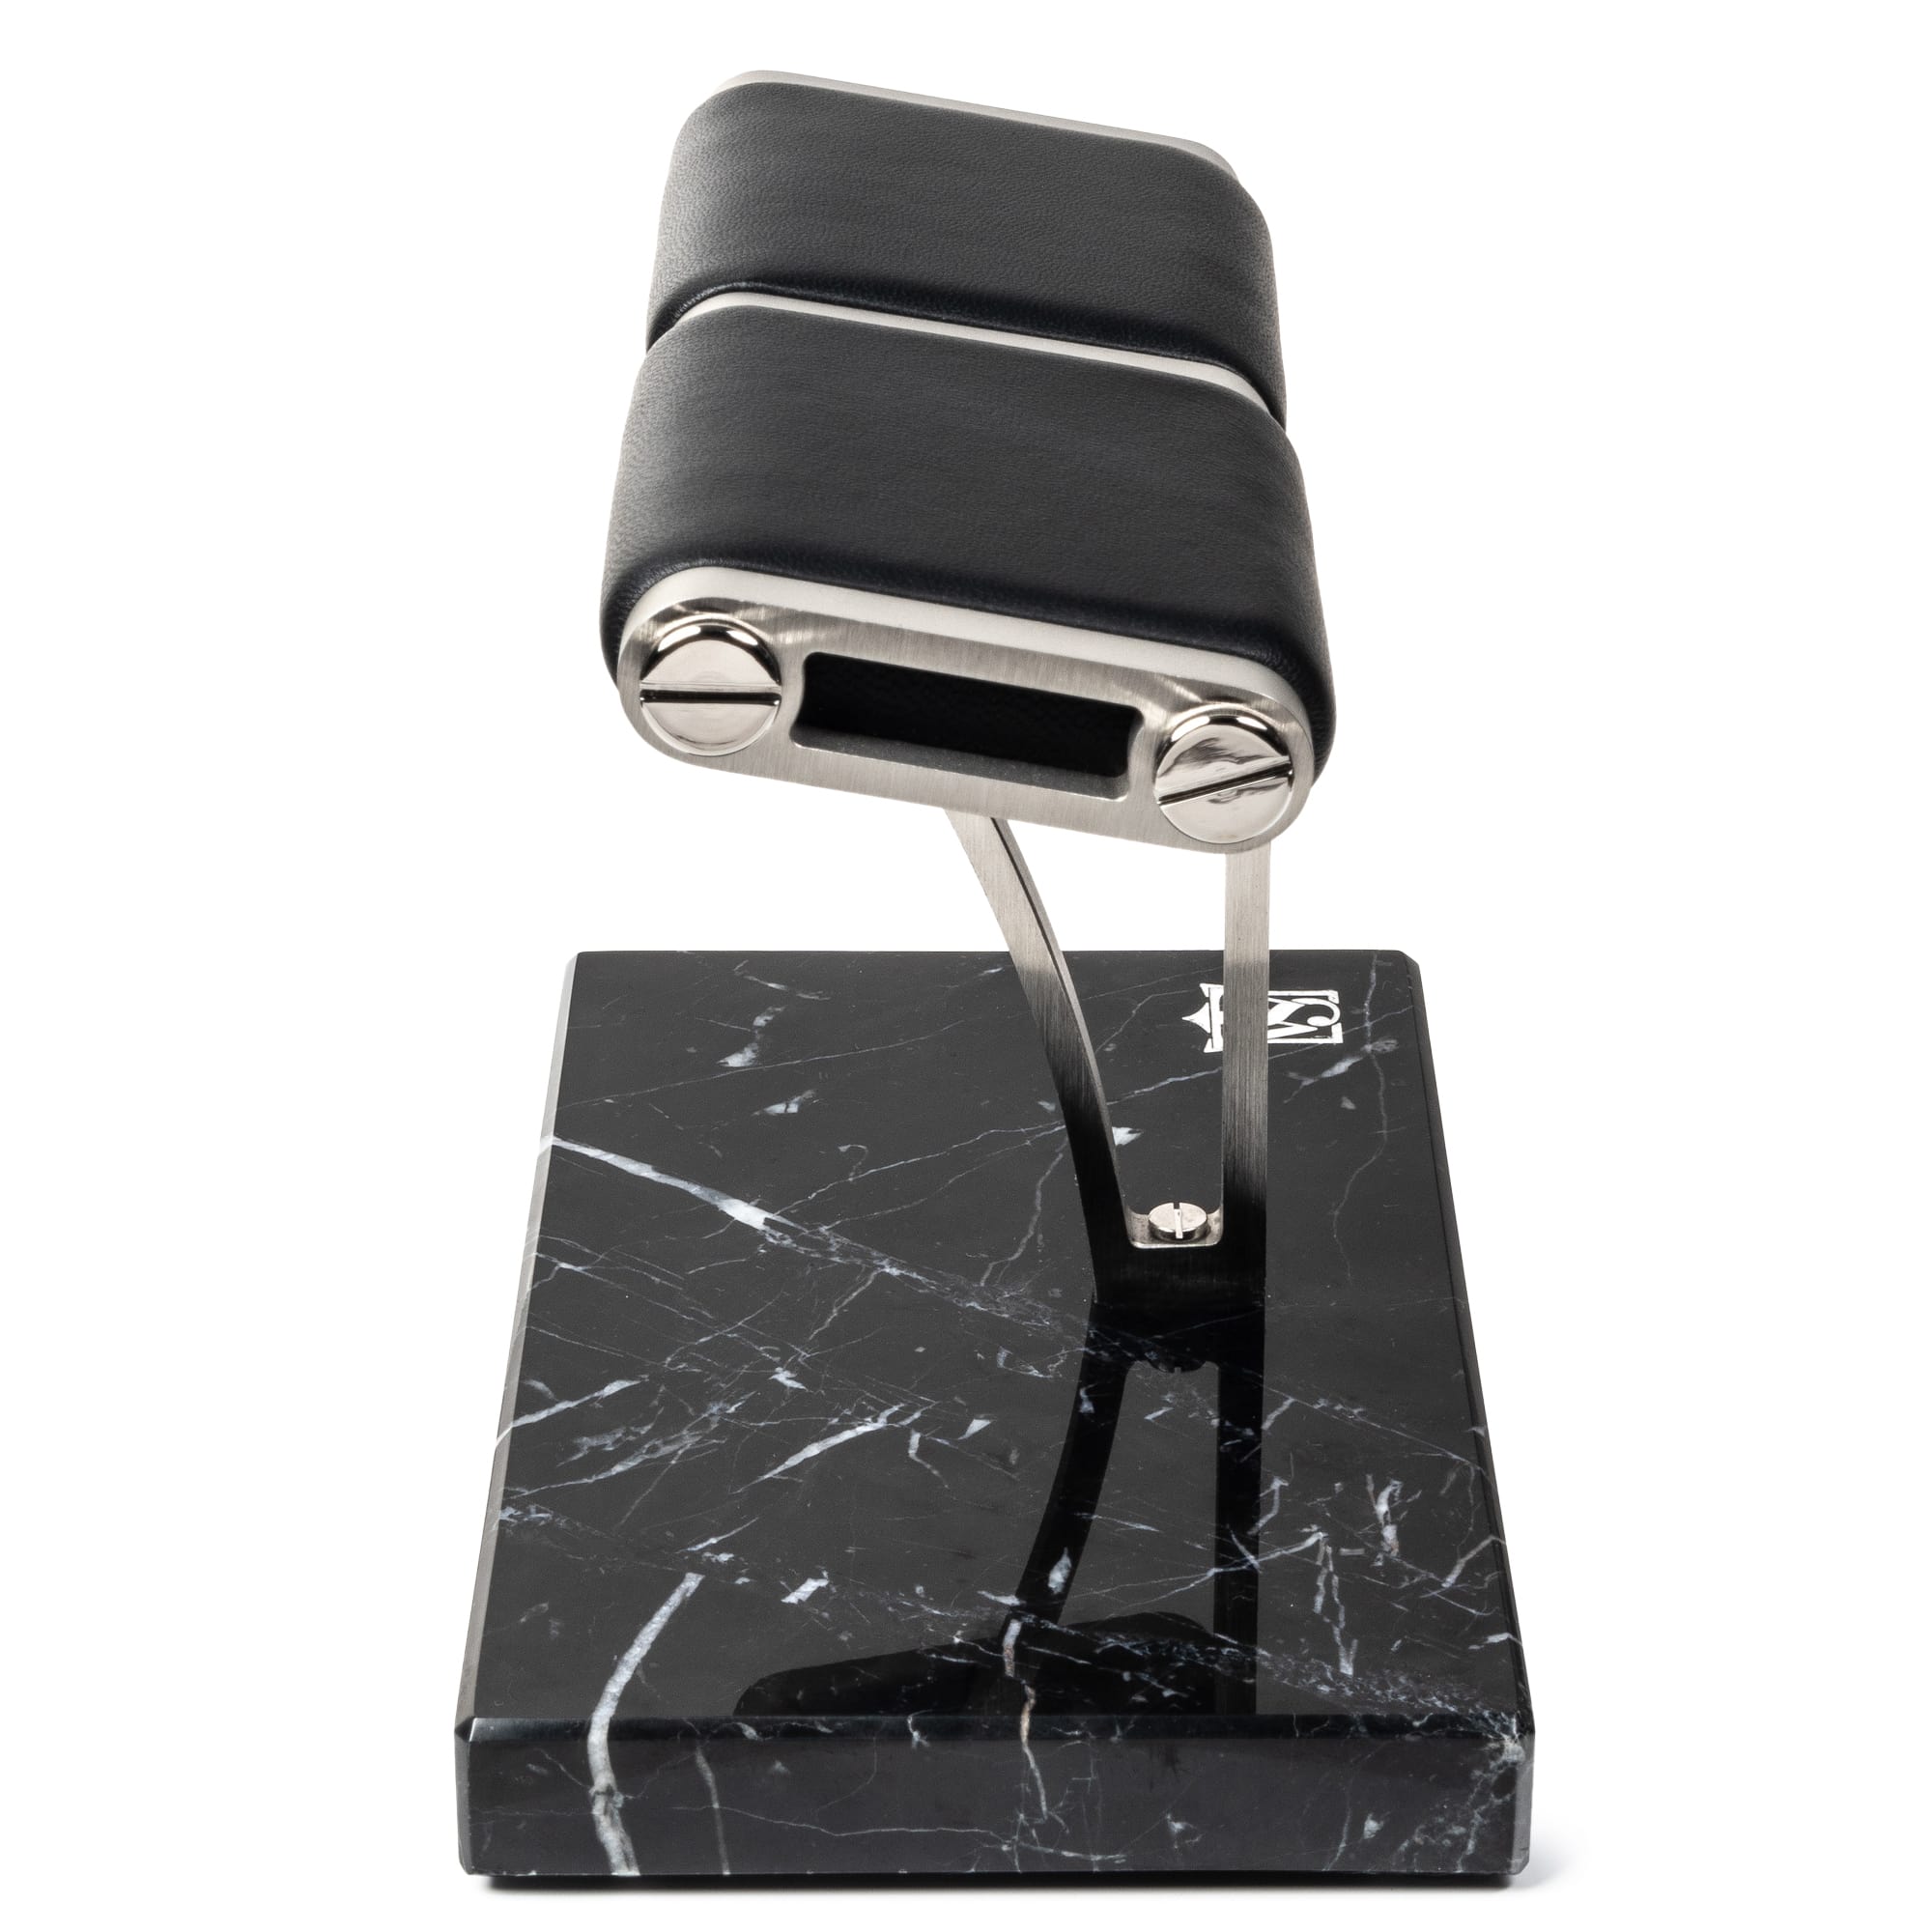 WATCH STAND 2.0 - DOUBLE - BLACK & SILVER